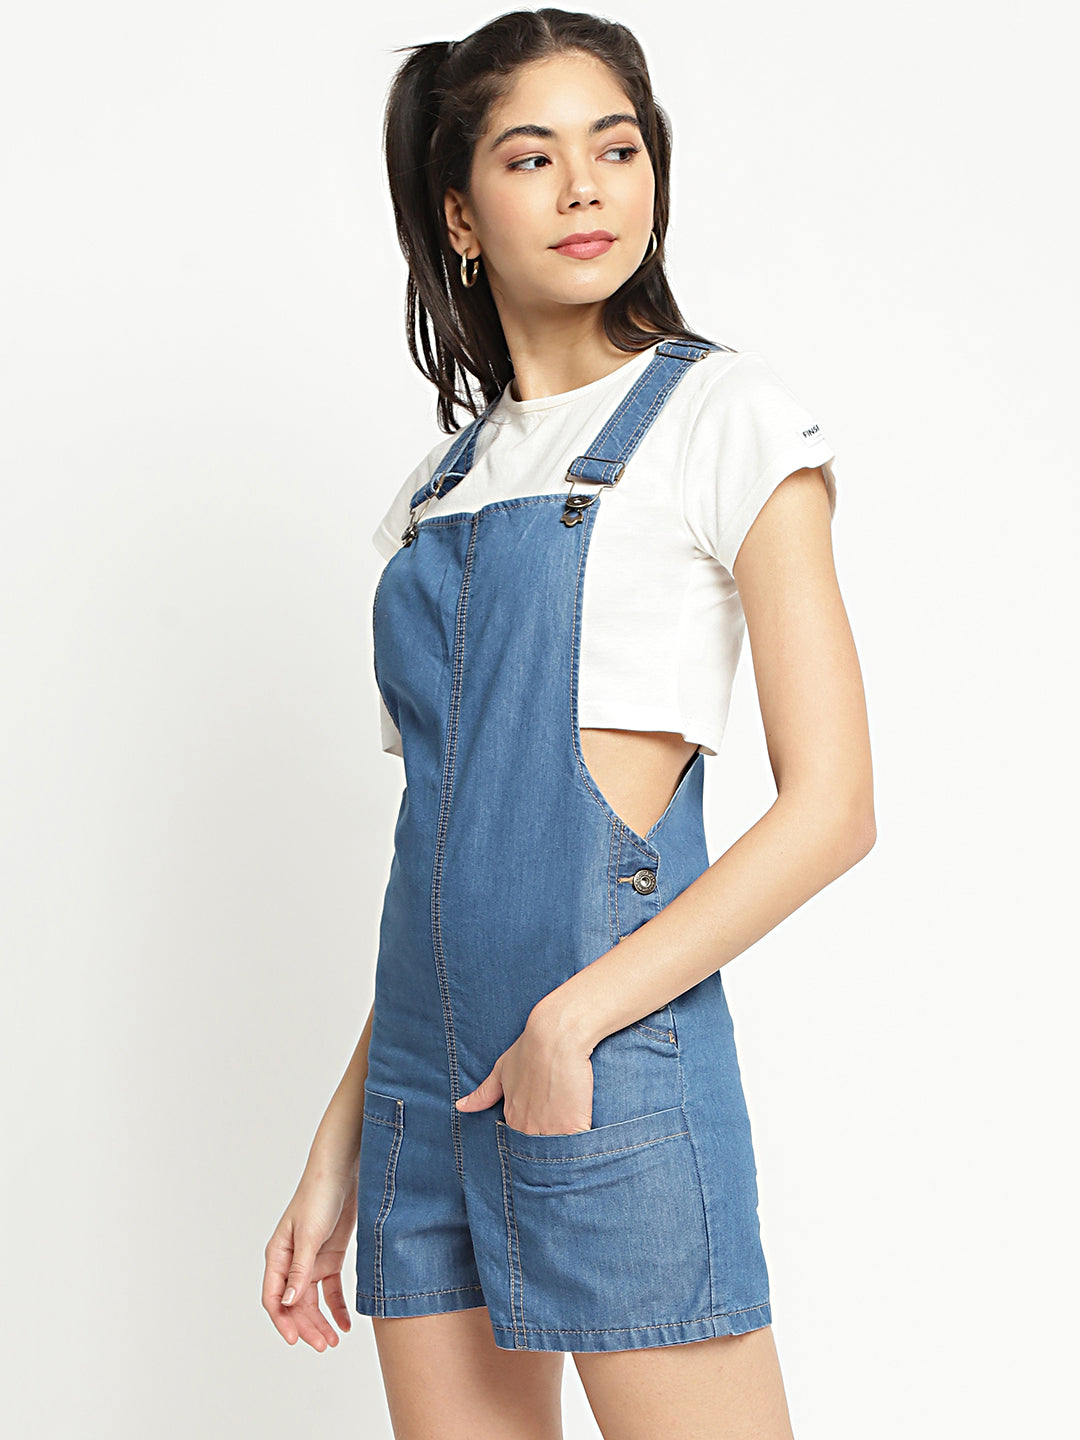 Dungarees in the size 27 for Women on sale | FASHIOLA INDIA